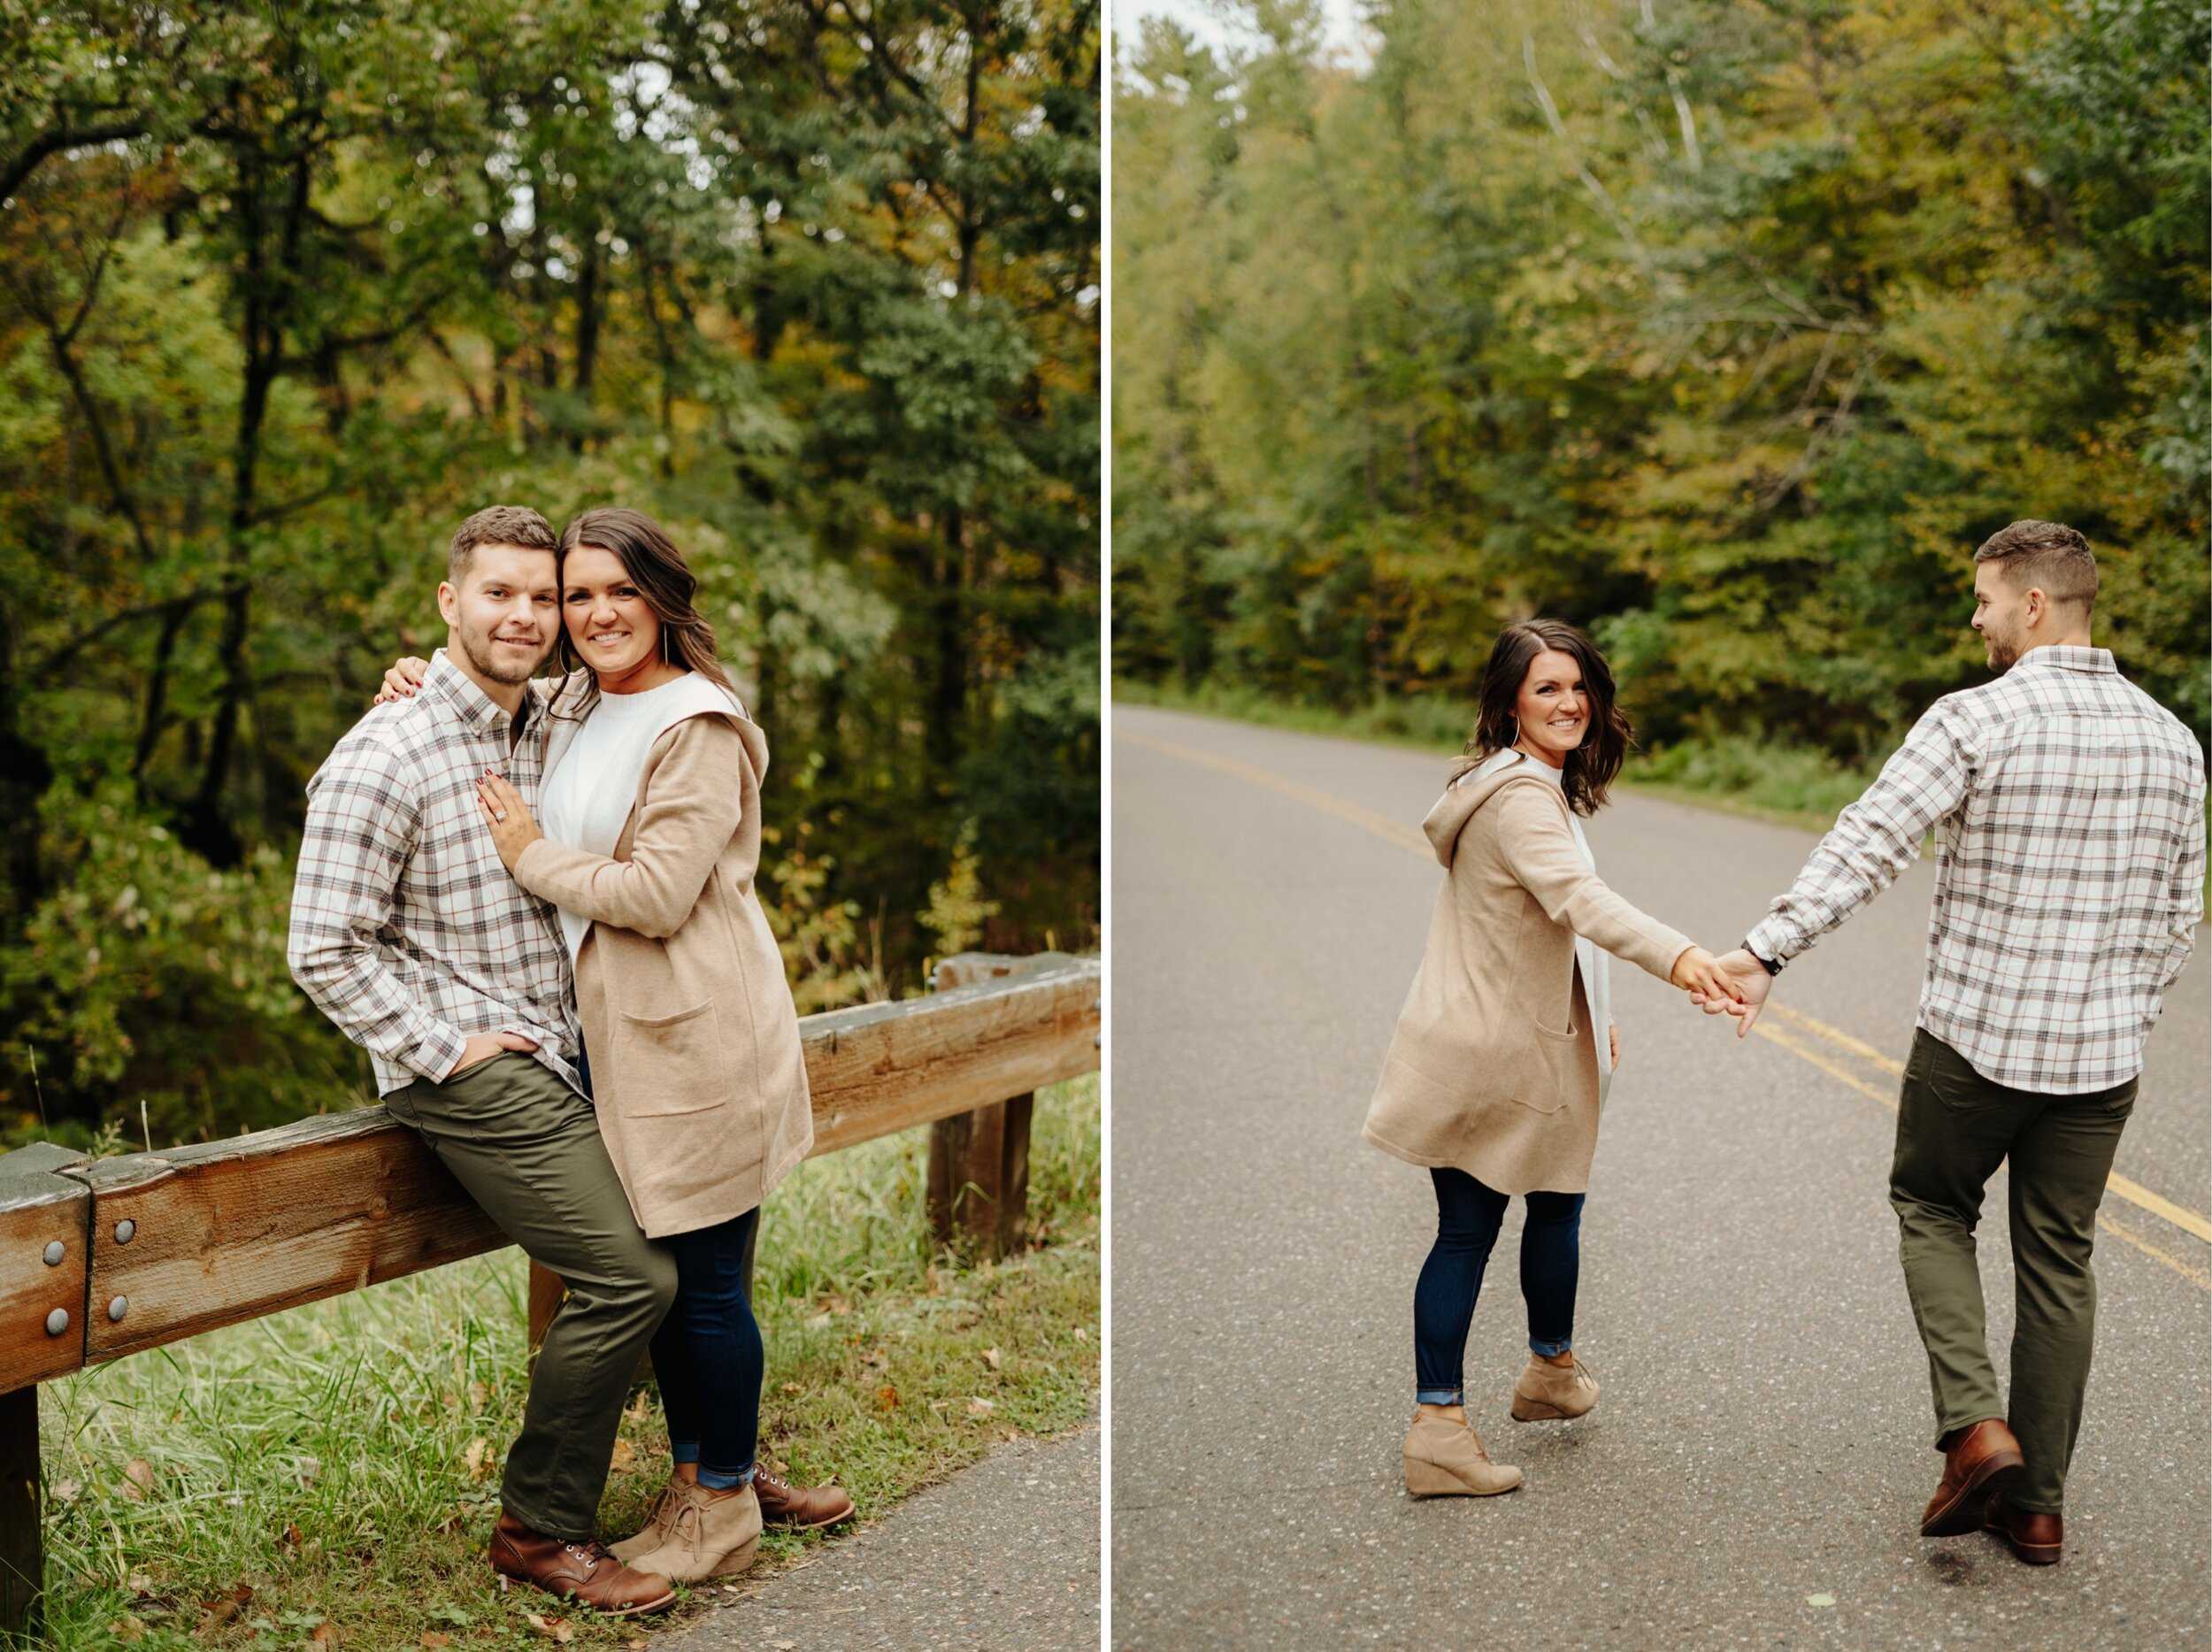 06_taylors-falls-engagement-session-interstate-park-mckenzie-josh-23_taylors-falls-engagement-session-interstate-park-mckenzie-josh-20.jpg